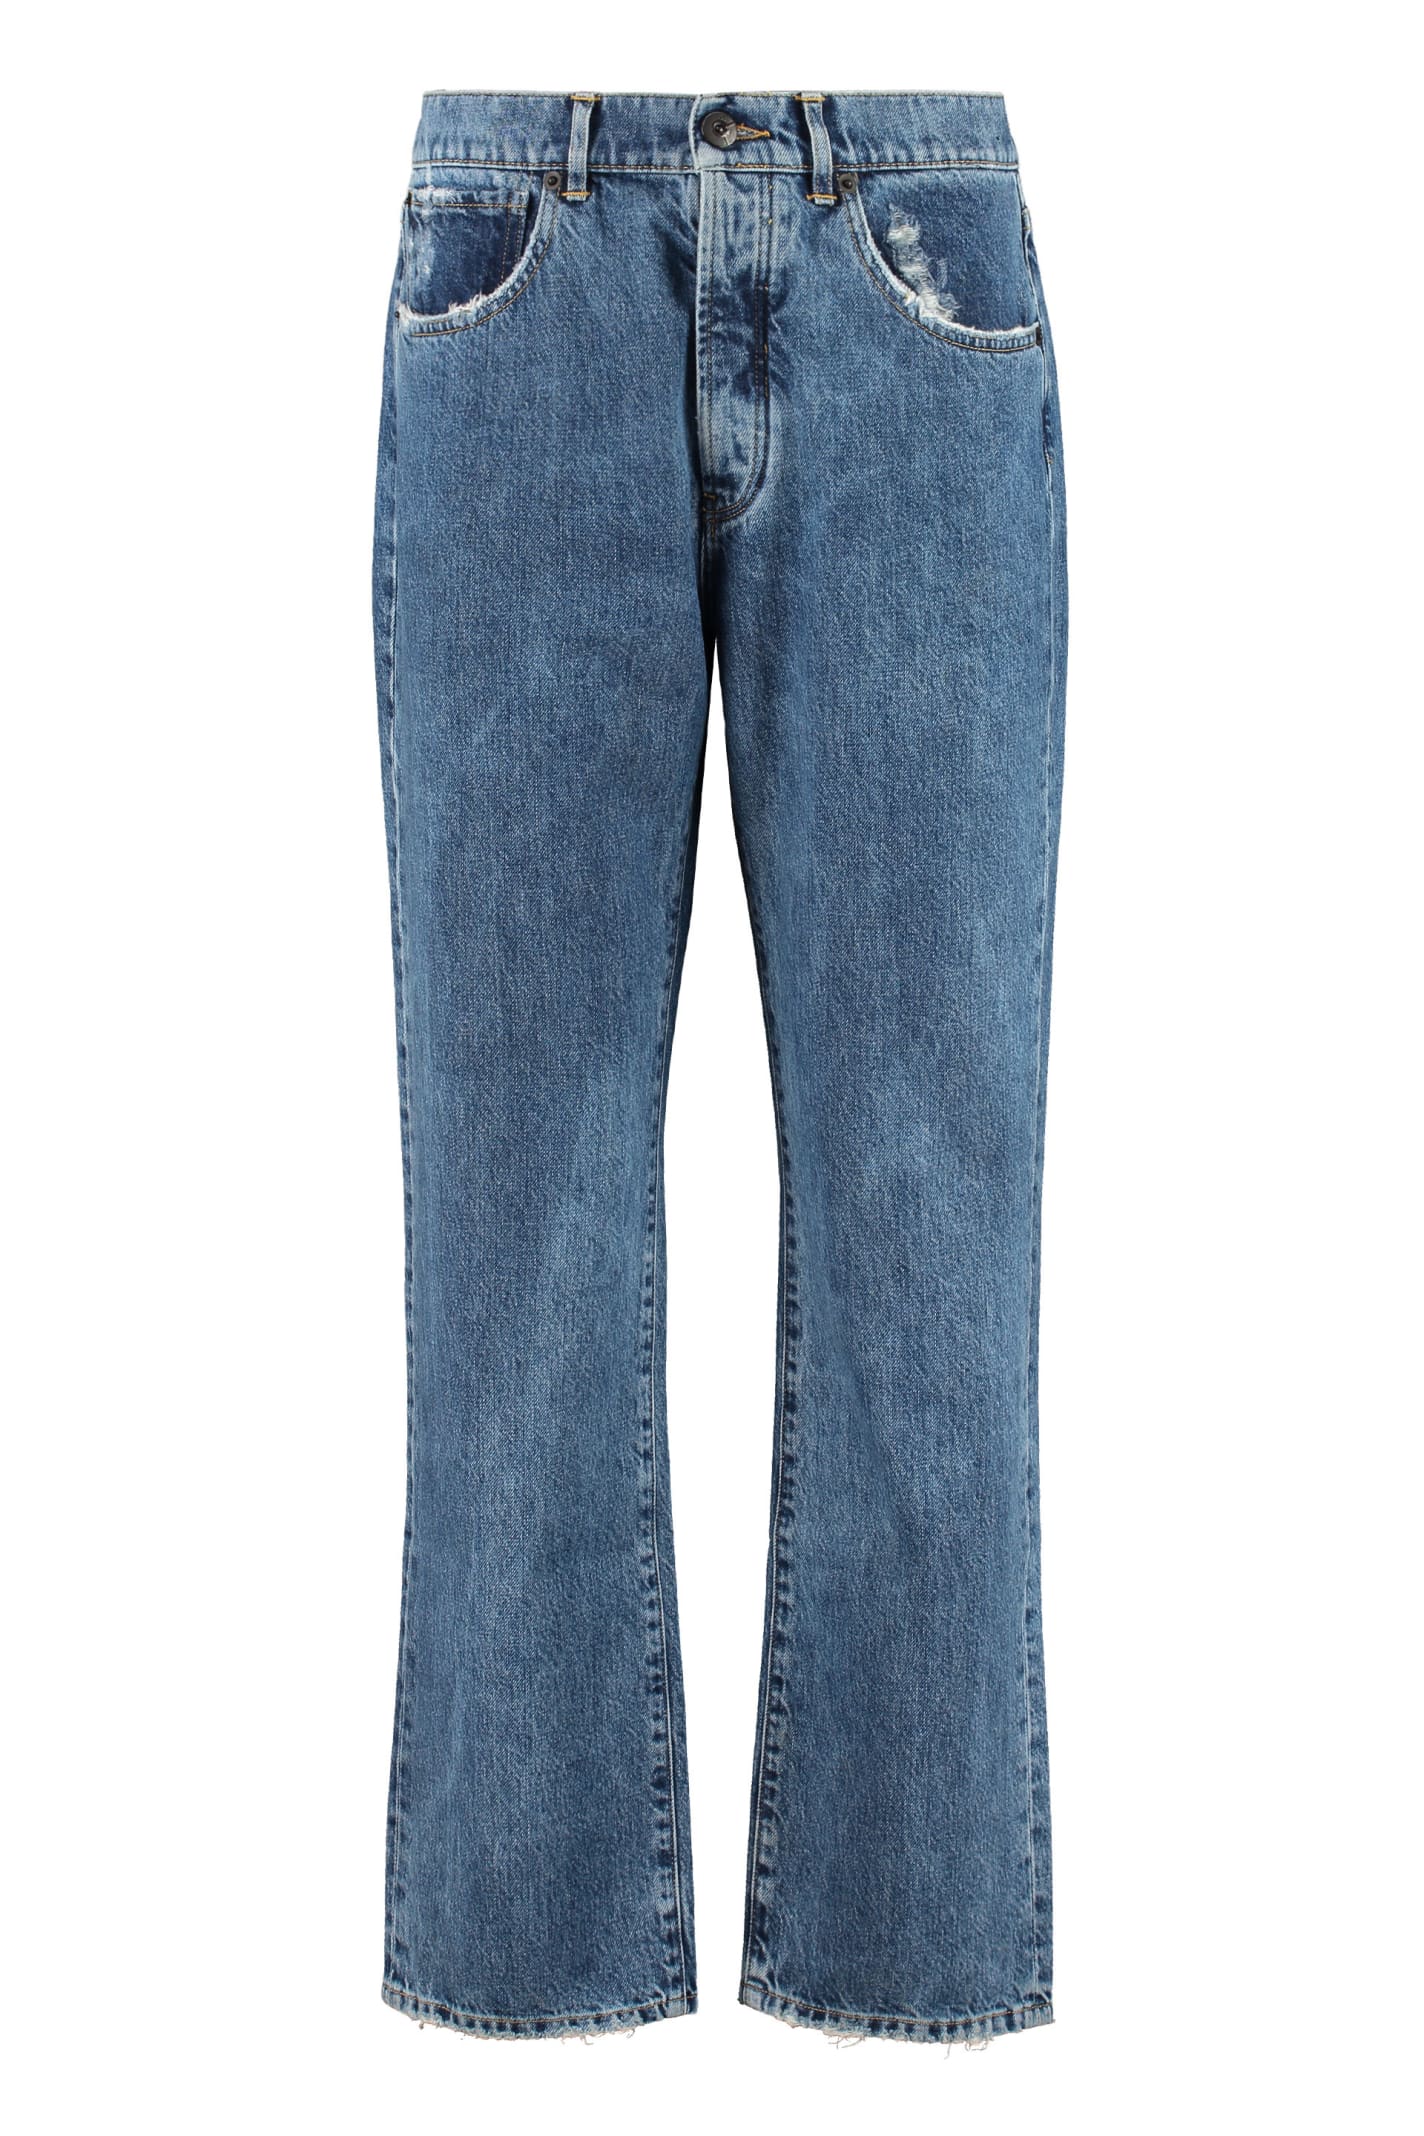 3x1 Sabina Relaxed Fit Jeans